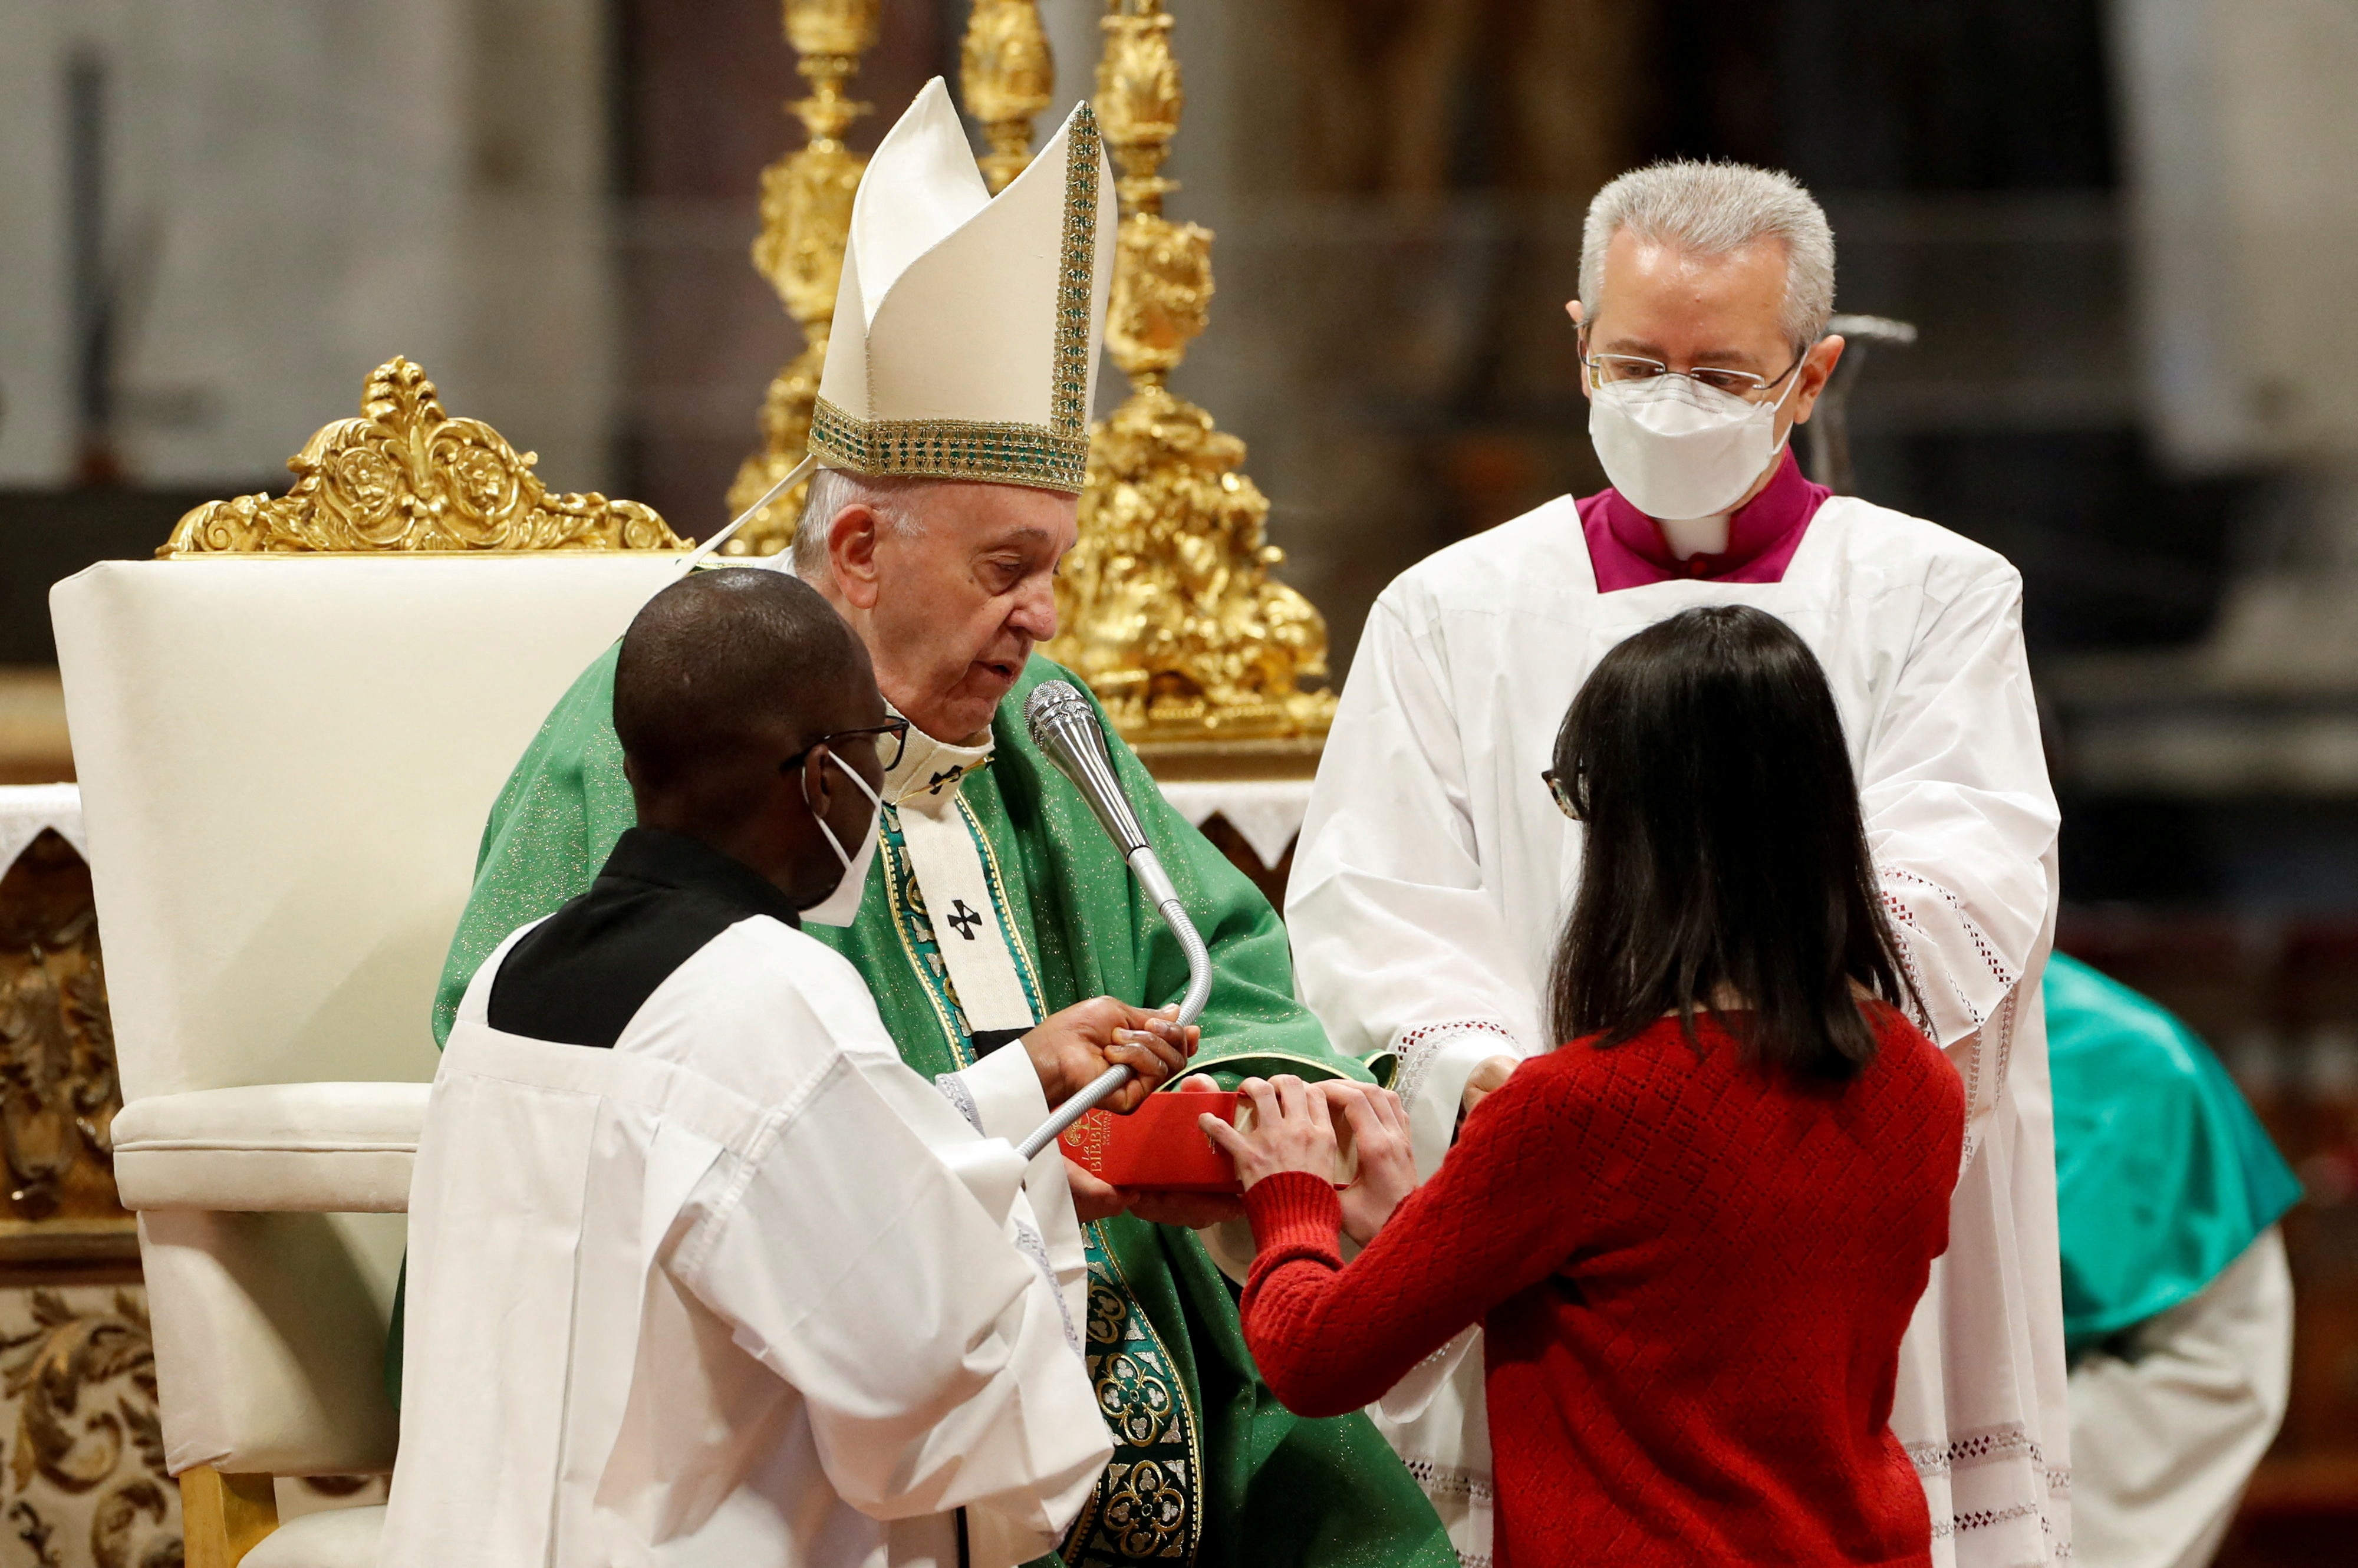 A new lector receives a gospel from Pope Francis during a Holy Mass held every year on the third Sunday of January to celebrate and study the Word of God, in St. Peter's Basilica at the Vatican, January 23, 2022. Remo Casilli, Reuters